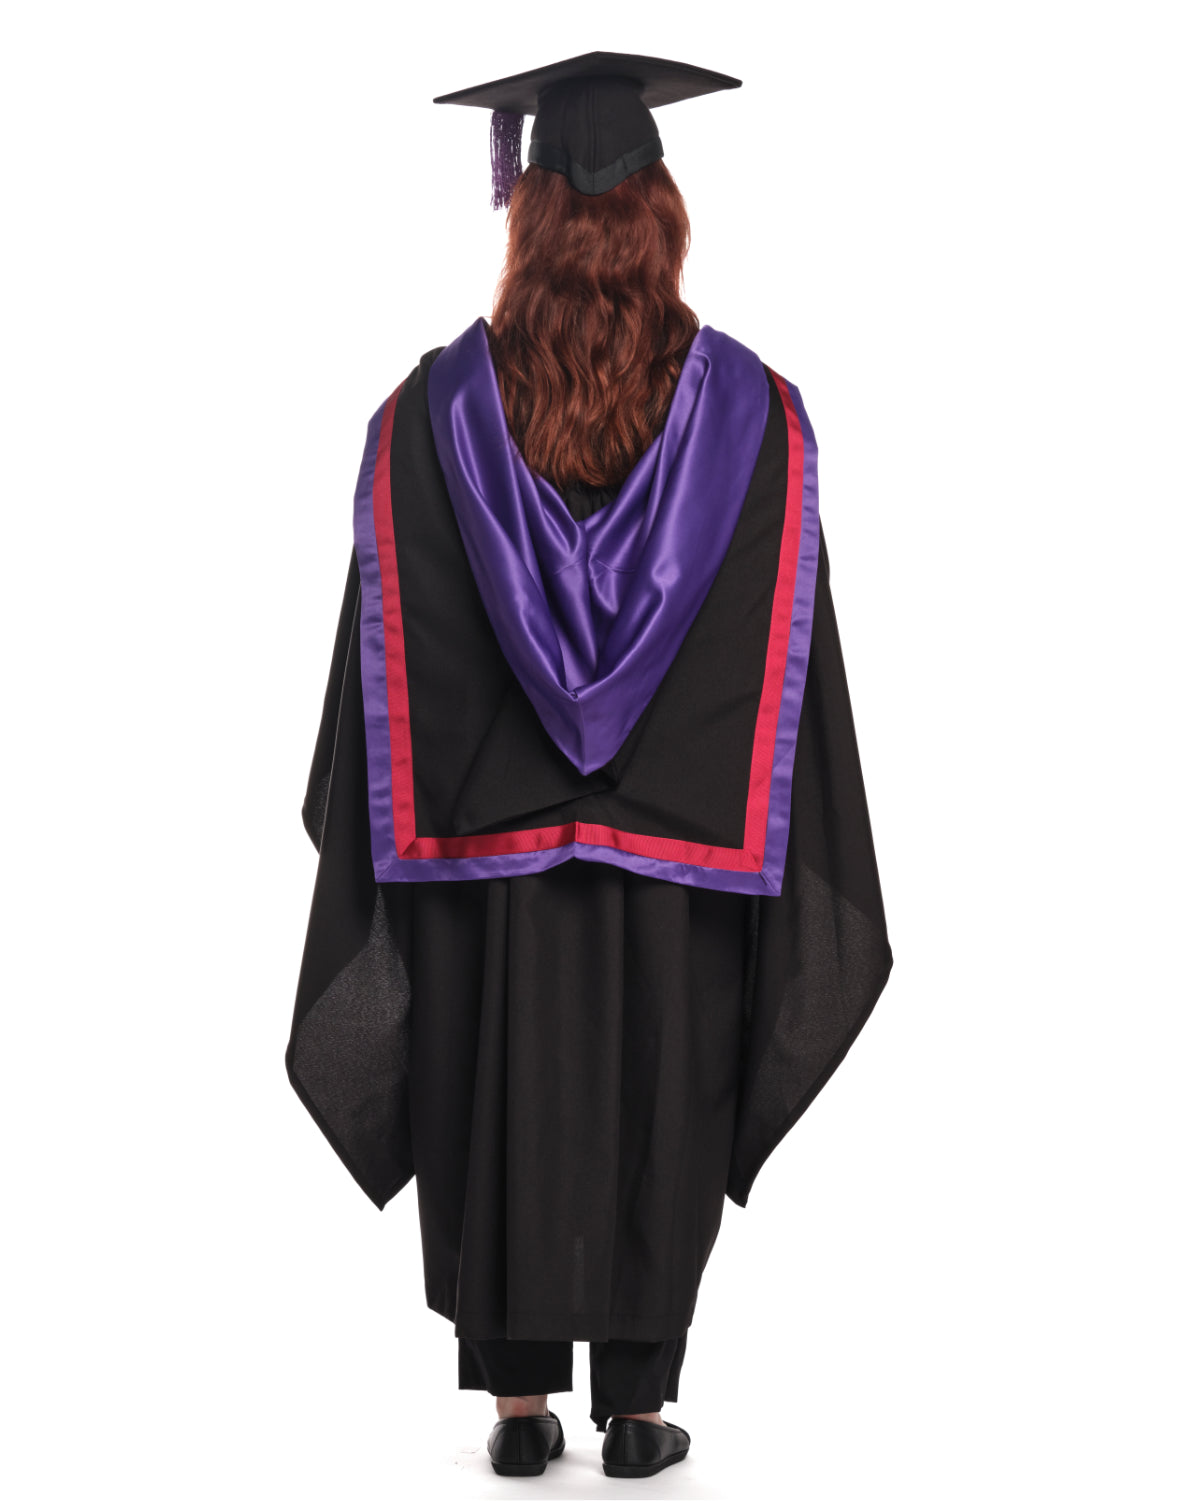 University of Portsmouth | BEng | Bachelor of Engineering Gown, Cap and Hood Set